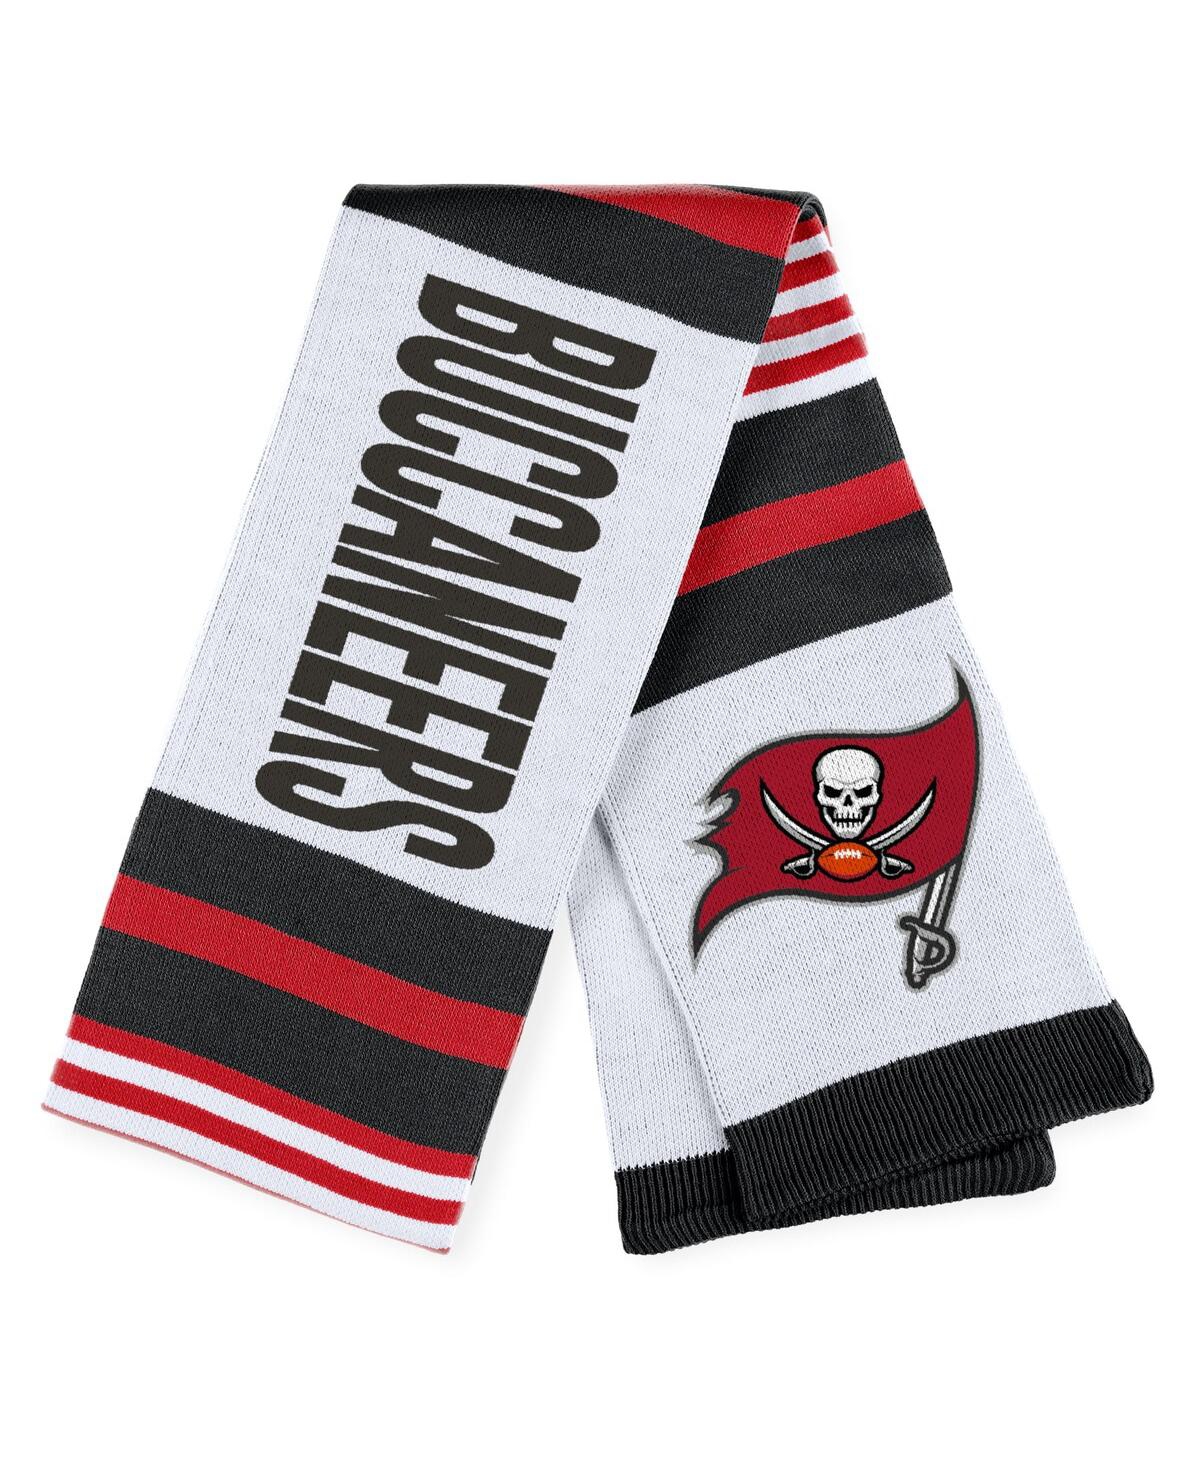 Women's Wear by Erin Andrews Tampa Bay Buccaneers Jacquard Striped Scarf - White, Black